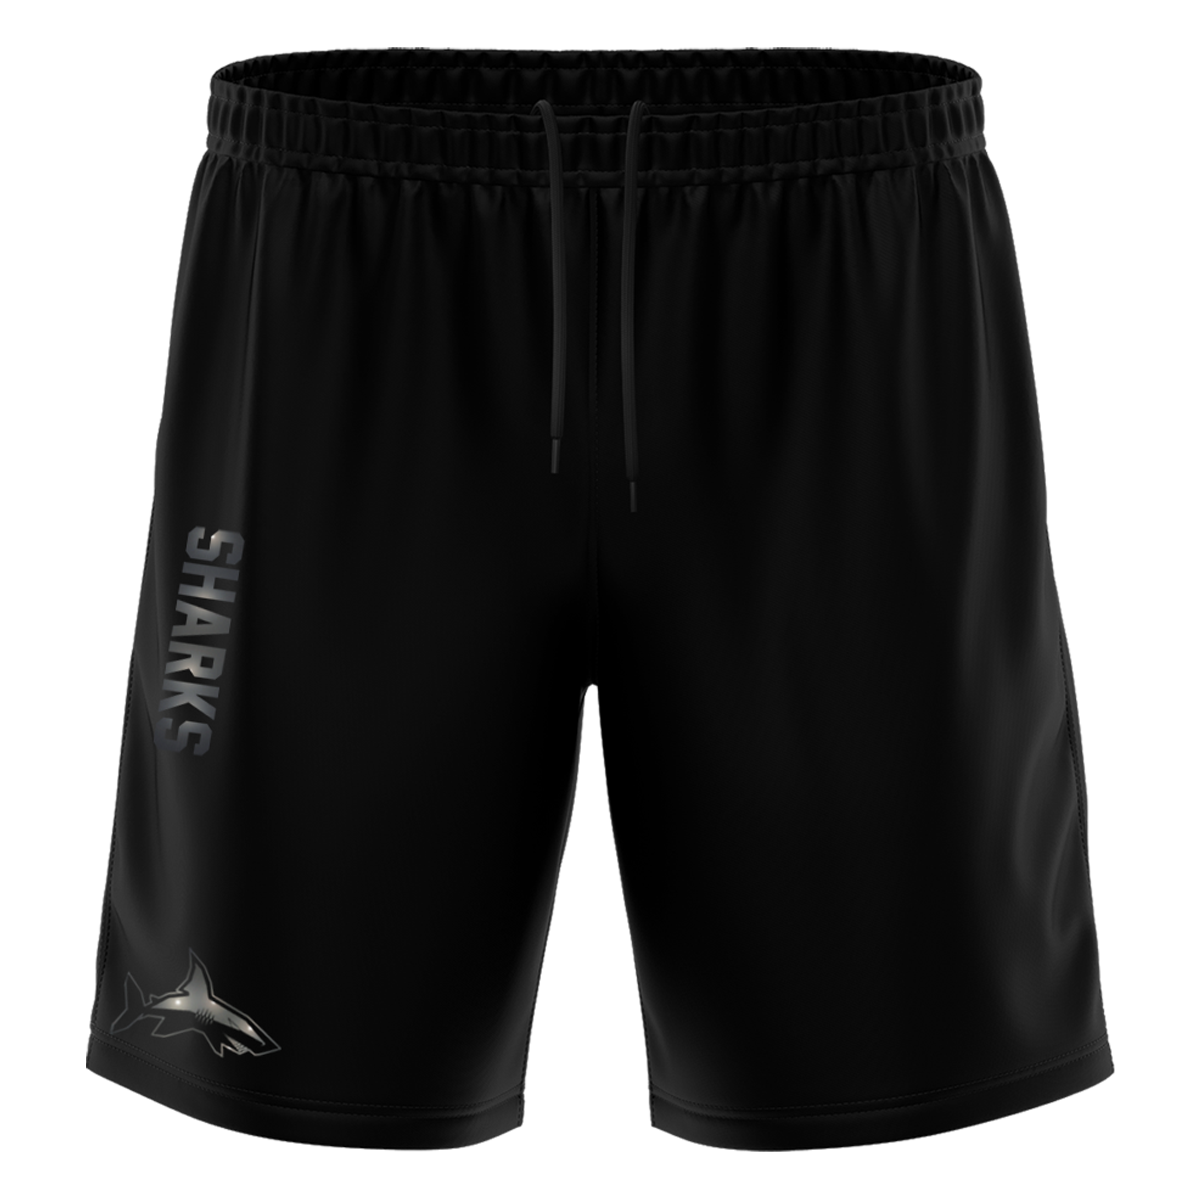 Sharks "Blackline" Training Short with Playernumber or Initials